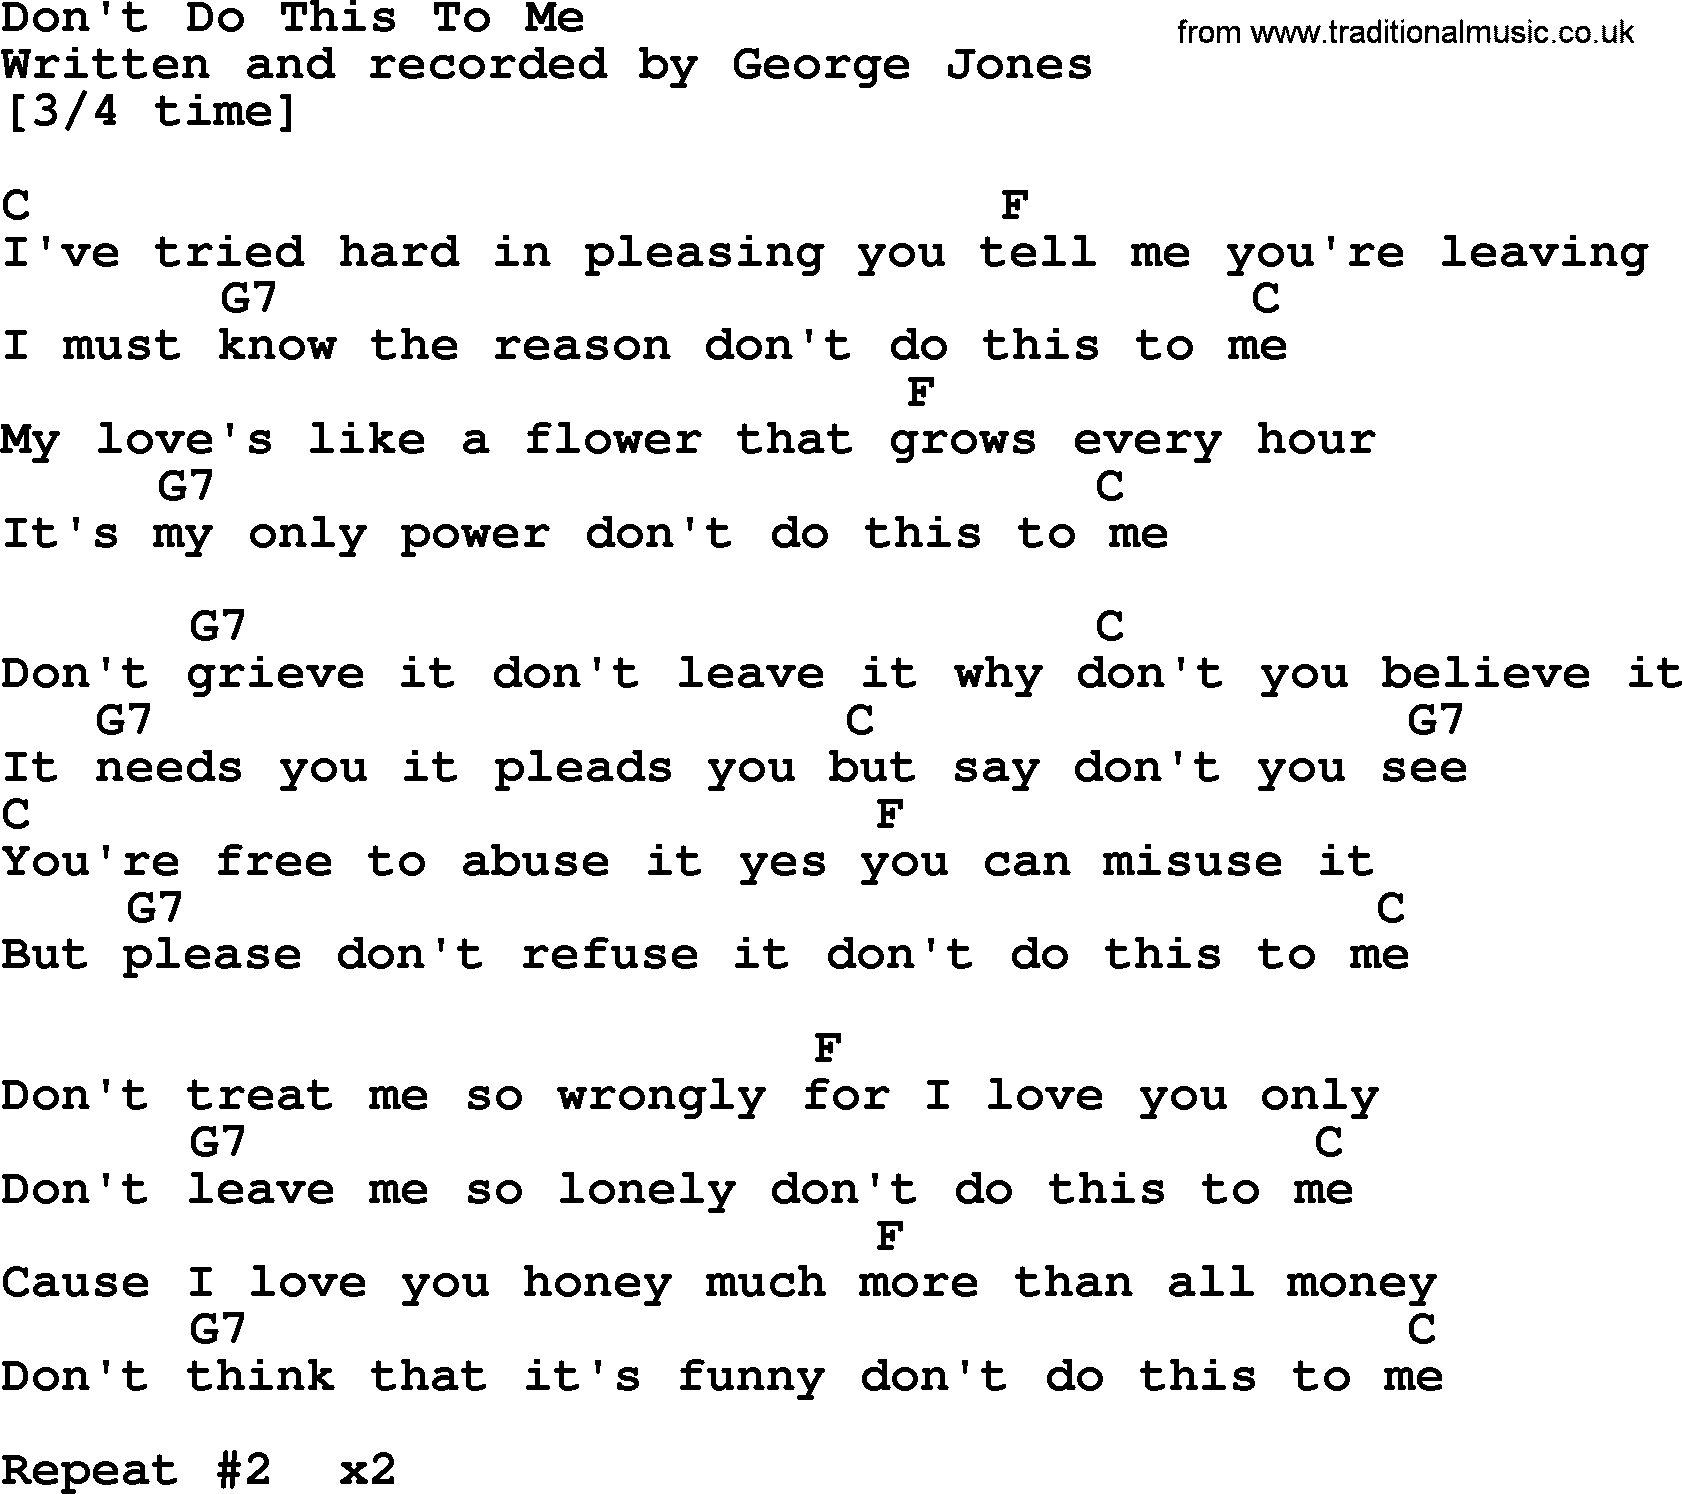 George Jones song: Don't Do This To Me, lyrics and chords